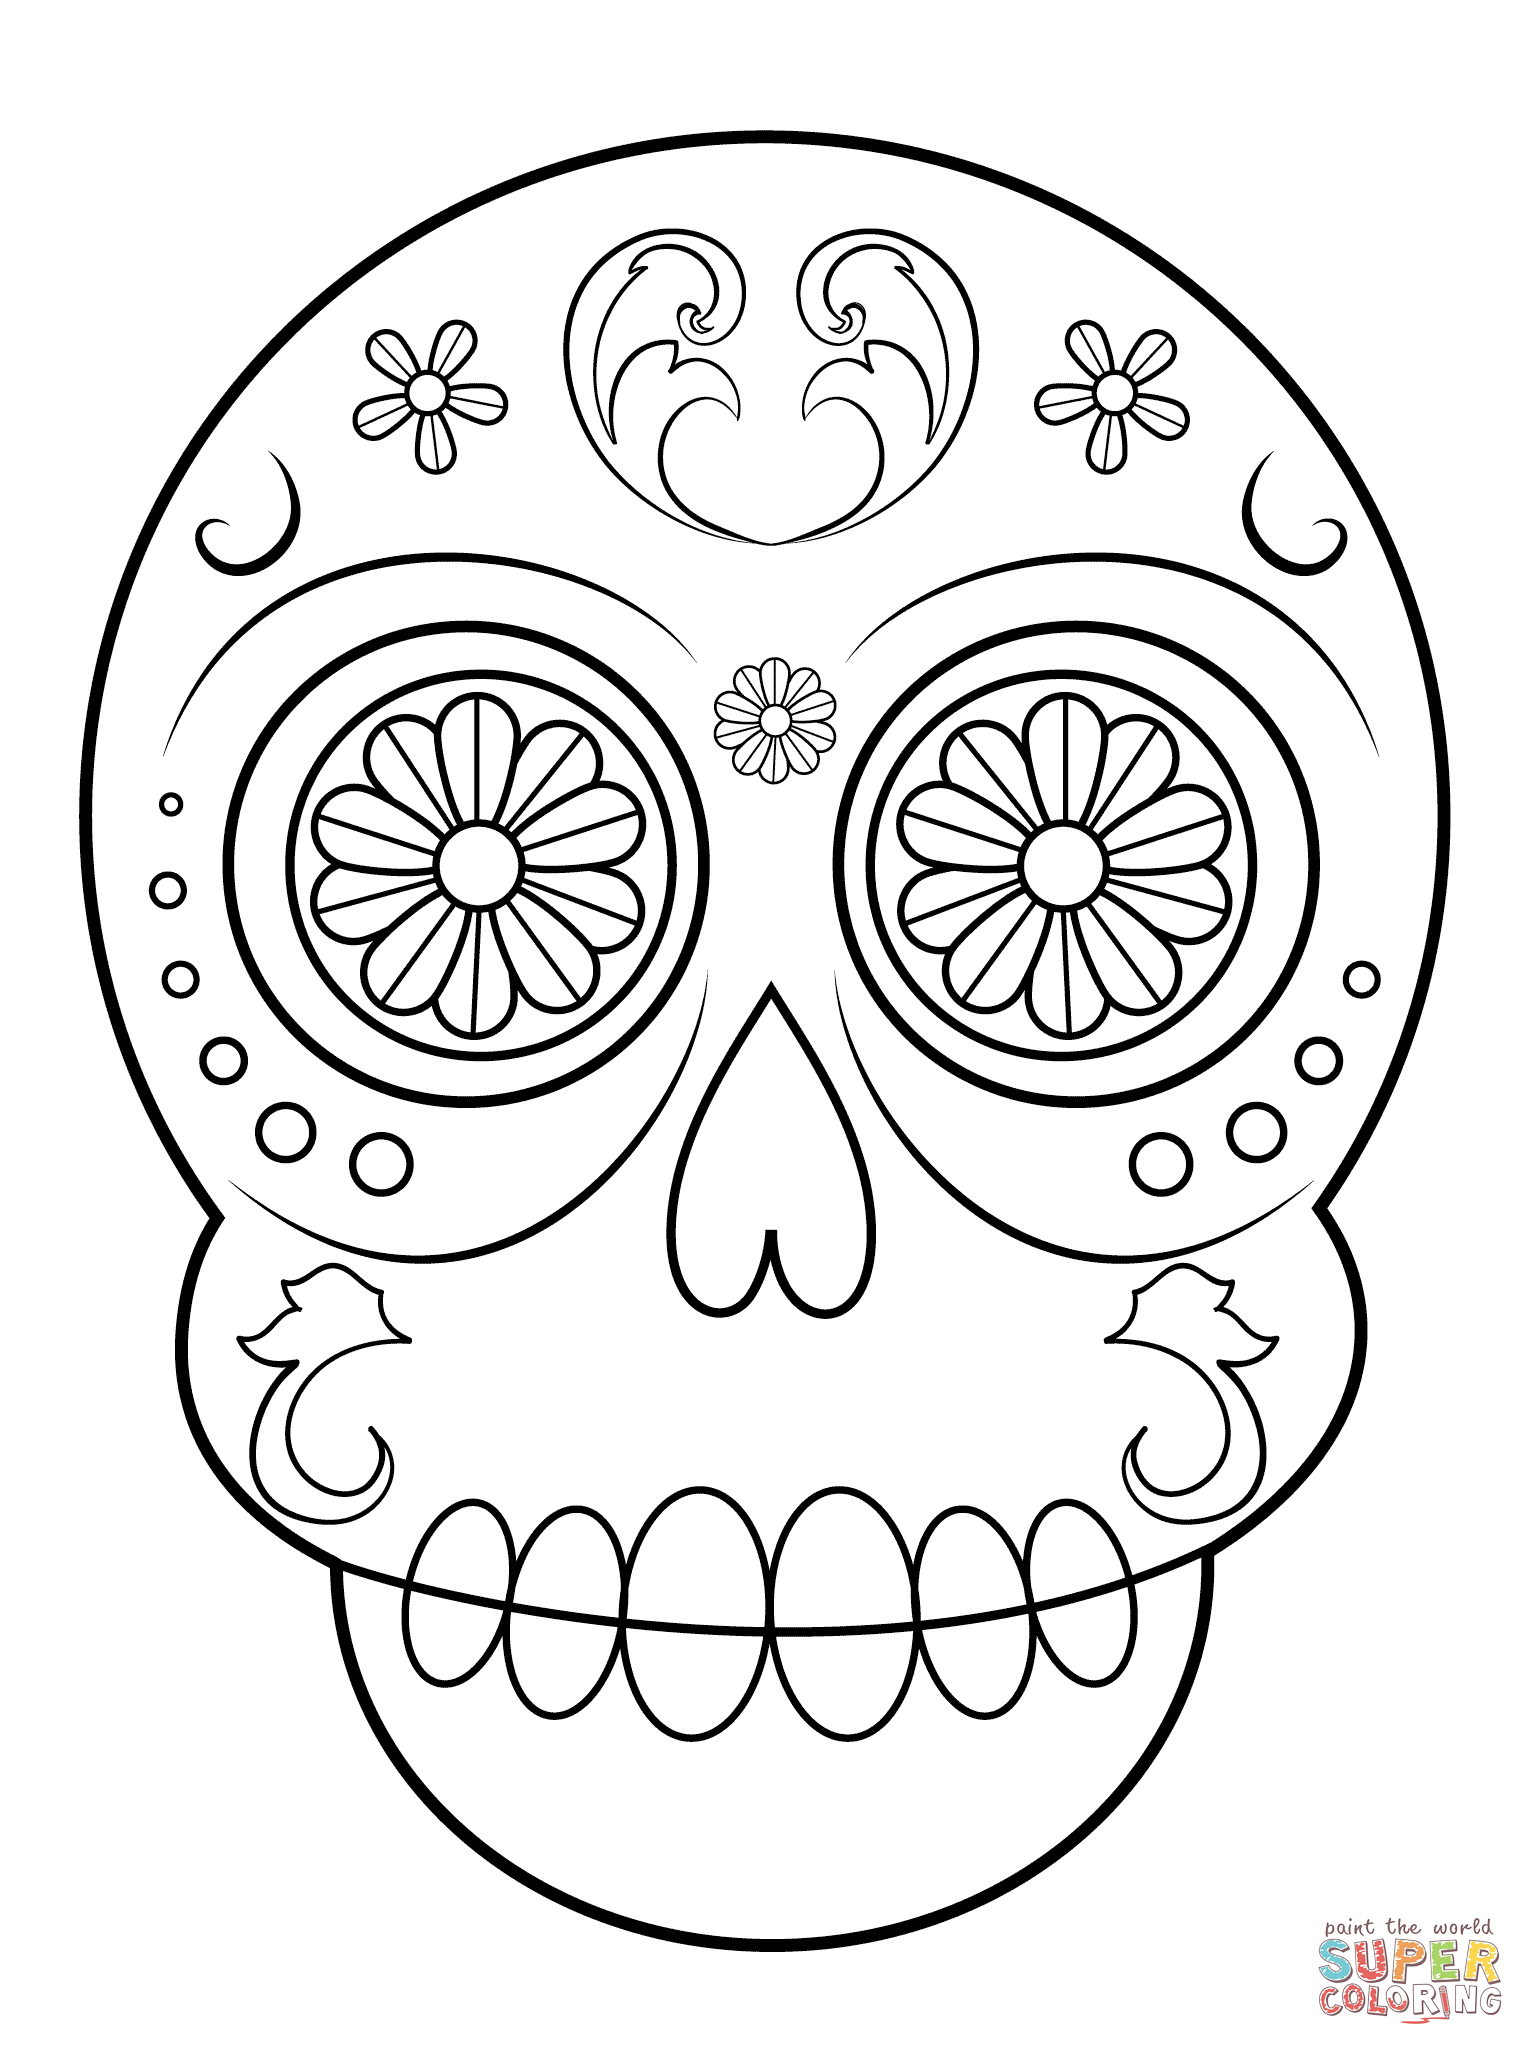 Day Of The Dead Sugar Skull Coloring Page. Free Printable Coloring Home